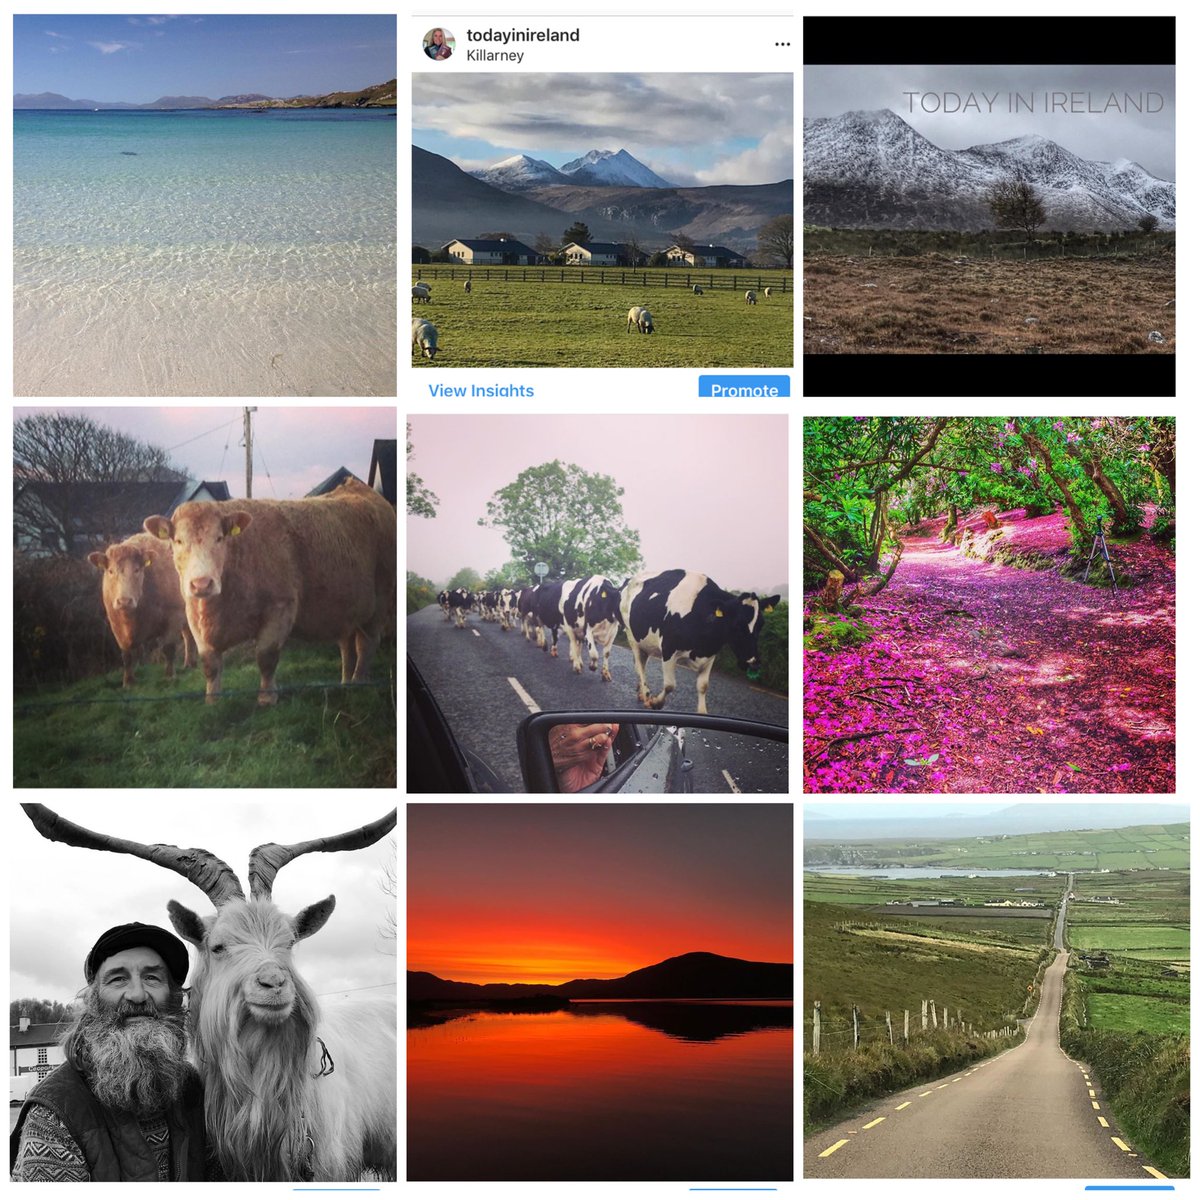 Top 9 photos on Instagram in 2019. 72,000+ likes. 
I hope all my followers enjoy the photos - that’s all the kudos I need!
#TodayInIreland 
#WatervillePhotographyGallery #watervilleireland #visitwaterville #skelligcoast #Ireland #topnine2019 #top9of2019